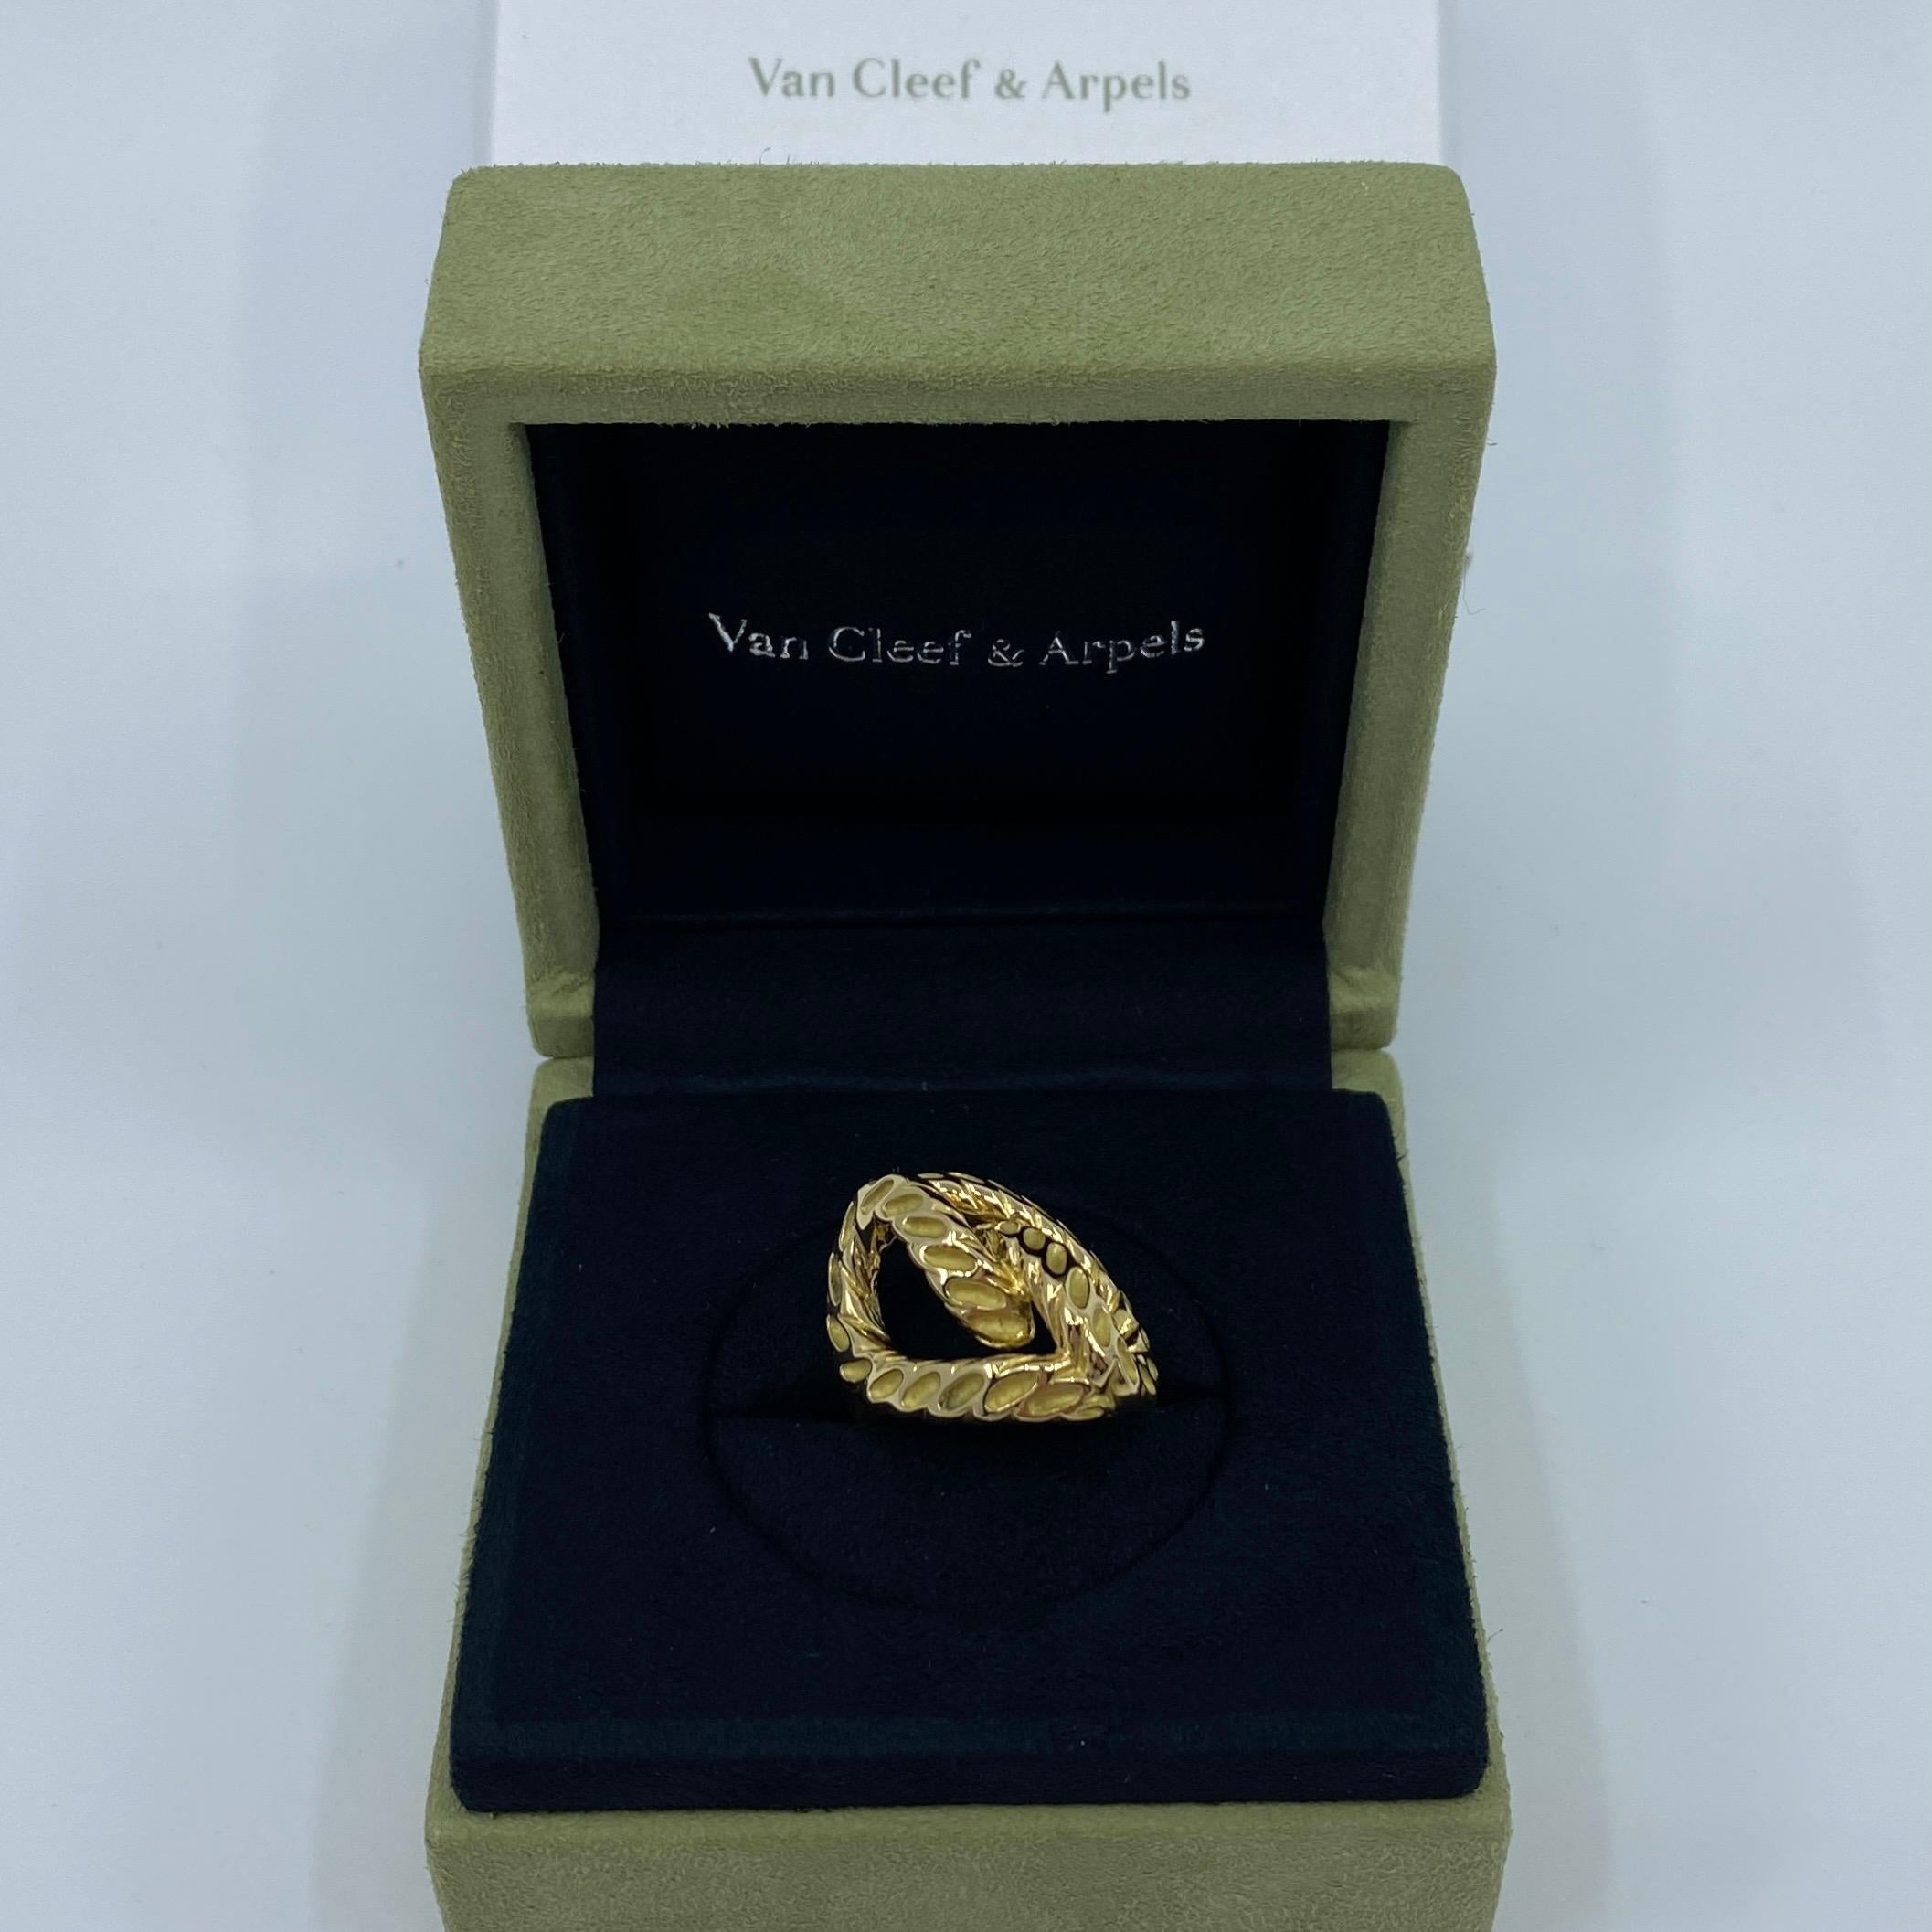 Rare Vintage Van Cleef & Arpels 18 Karat Yellow Gold Braid Rope Motif Ring.

A stunning vintage ring with a unique braid/rope design typical of vintage VCA.

The ring is signed VCA 750 with serial numbers and French eagle gold hallmark.

A quality